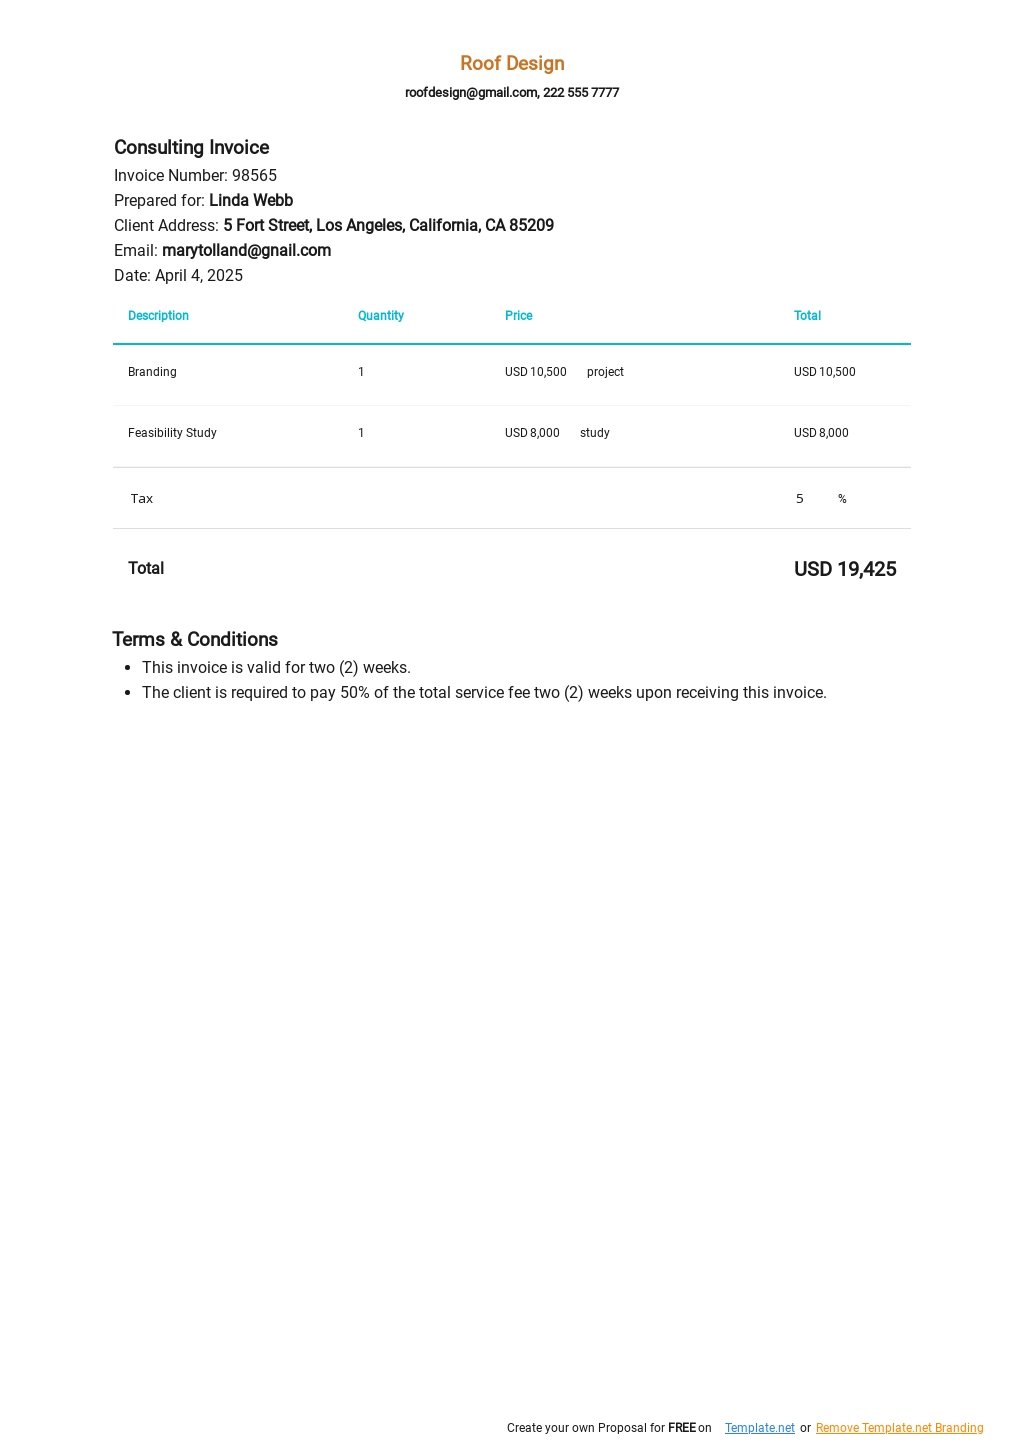 Blank Consulting Invoice Template.jpe